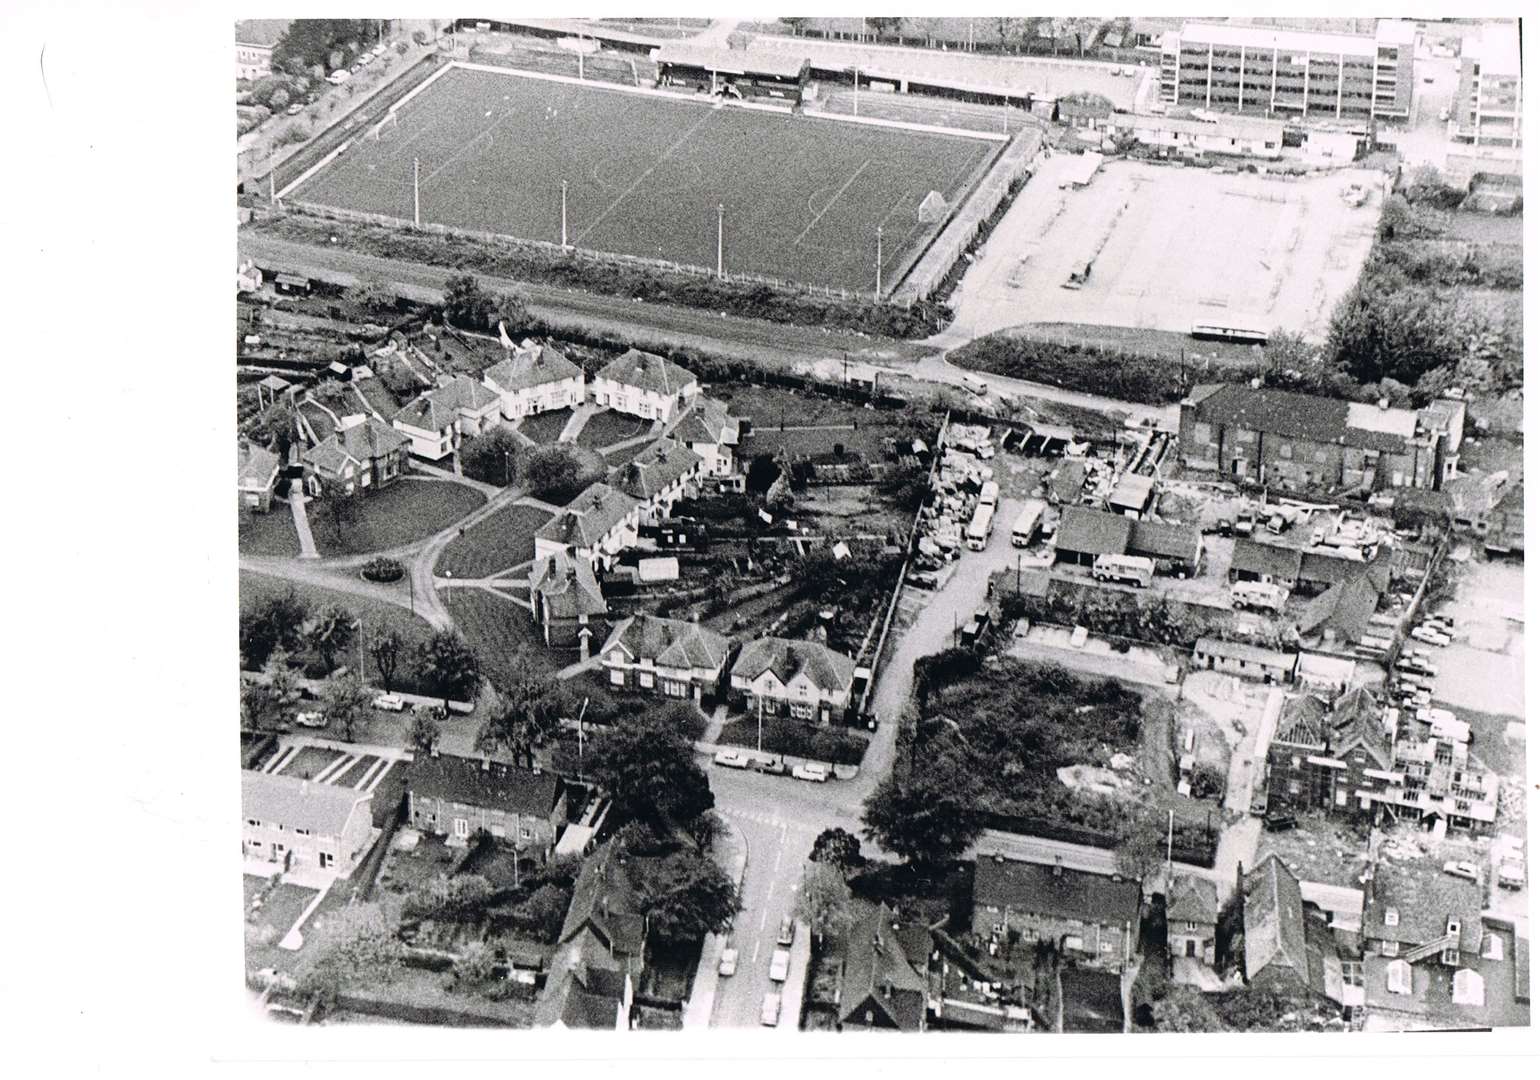 The Bull Ground in Sittingbourne – now a Sainsbury's – was home to Sittingbourne FC before their move to Central Park in 1990